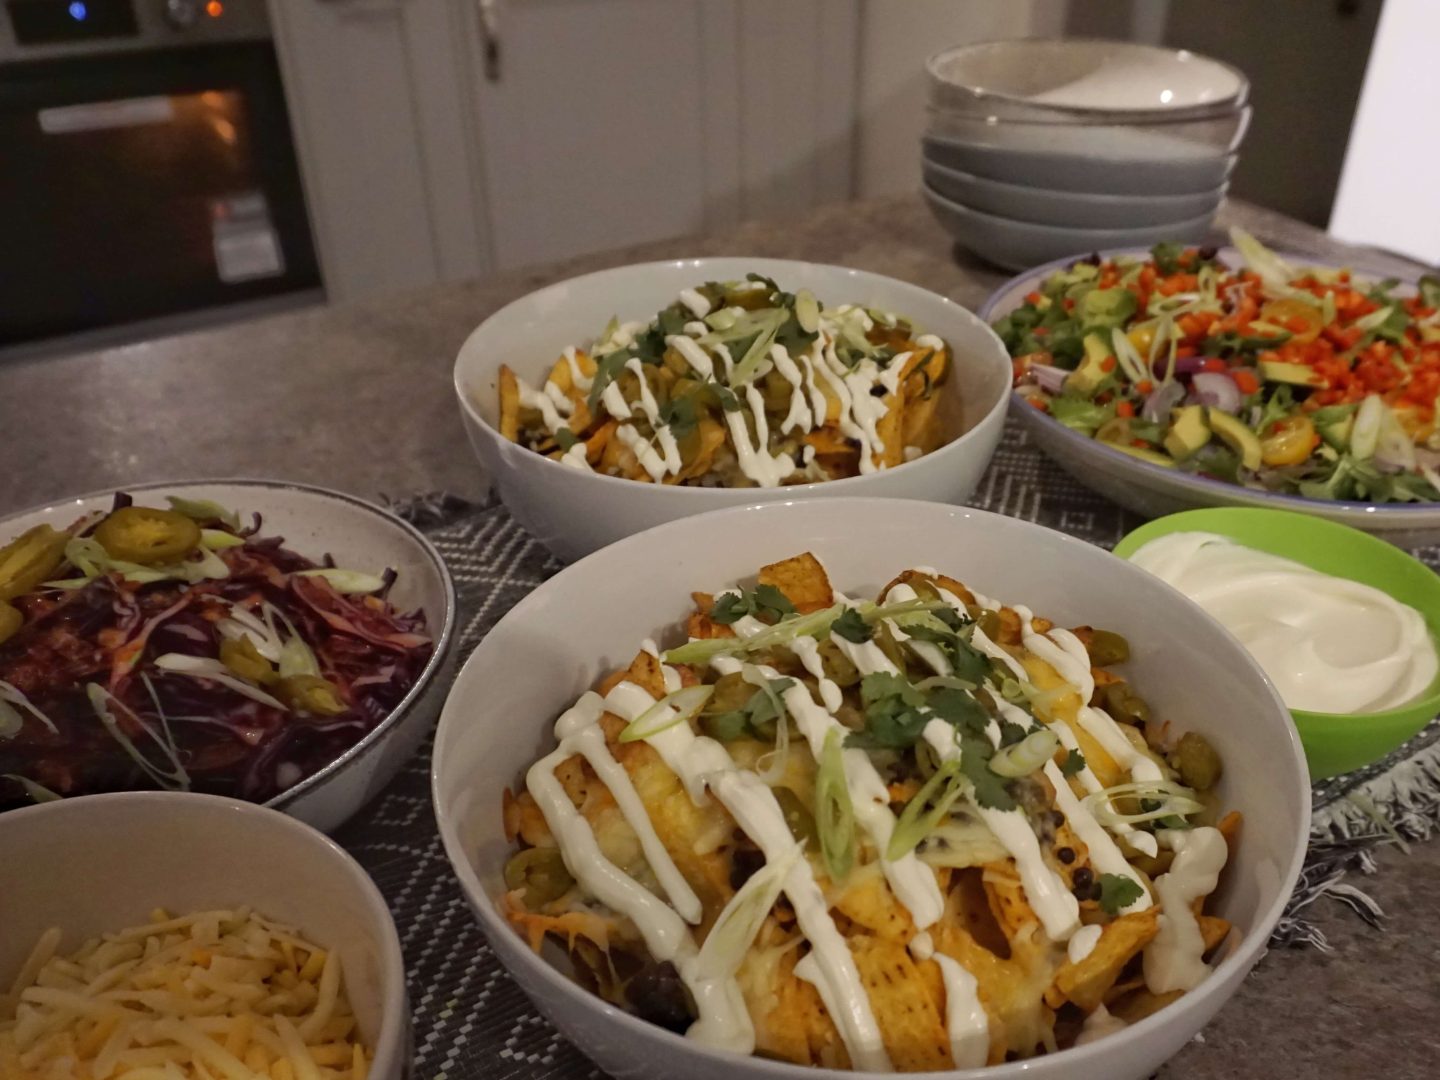 Bowls of Mexican food prepared by yhangry chef Dean on a grey table with kitchen in the background